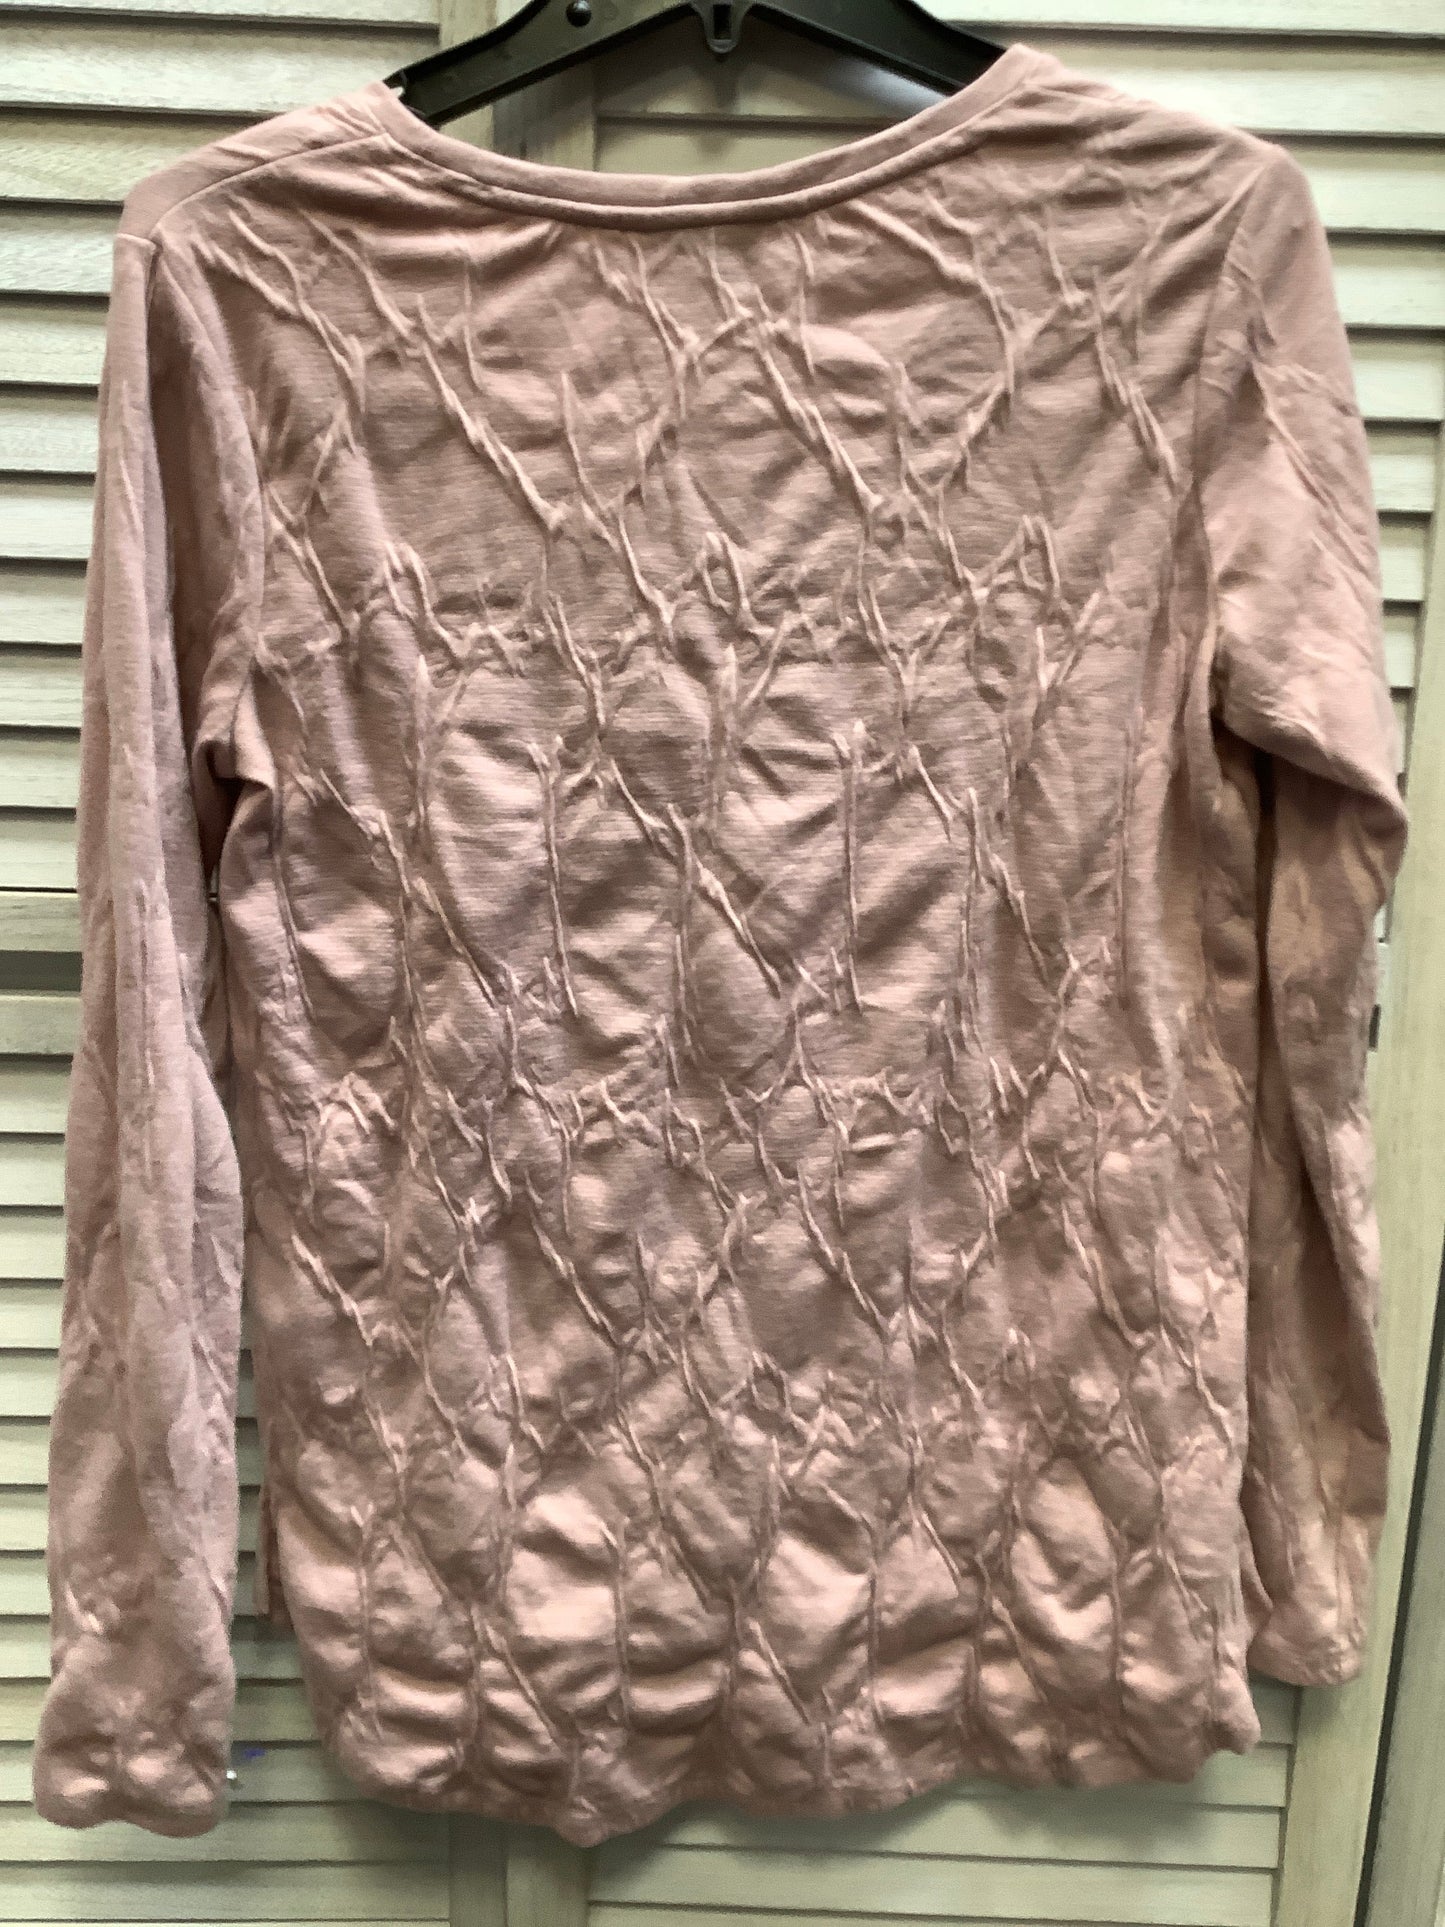 Pink Top Long Sleeve Simply Vera, Size S